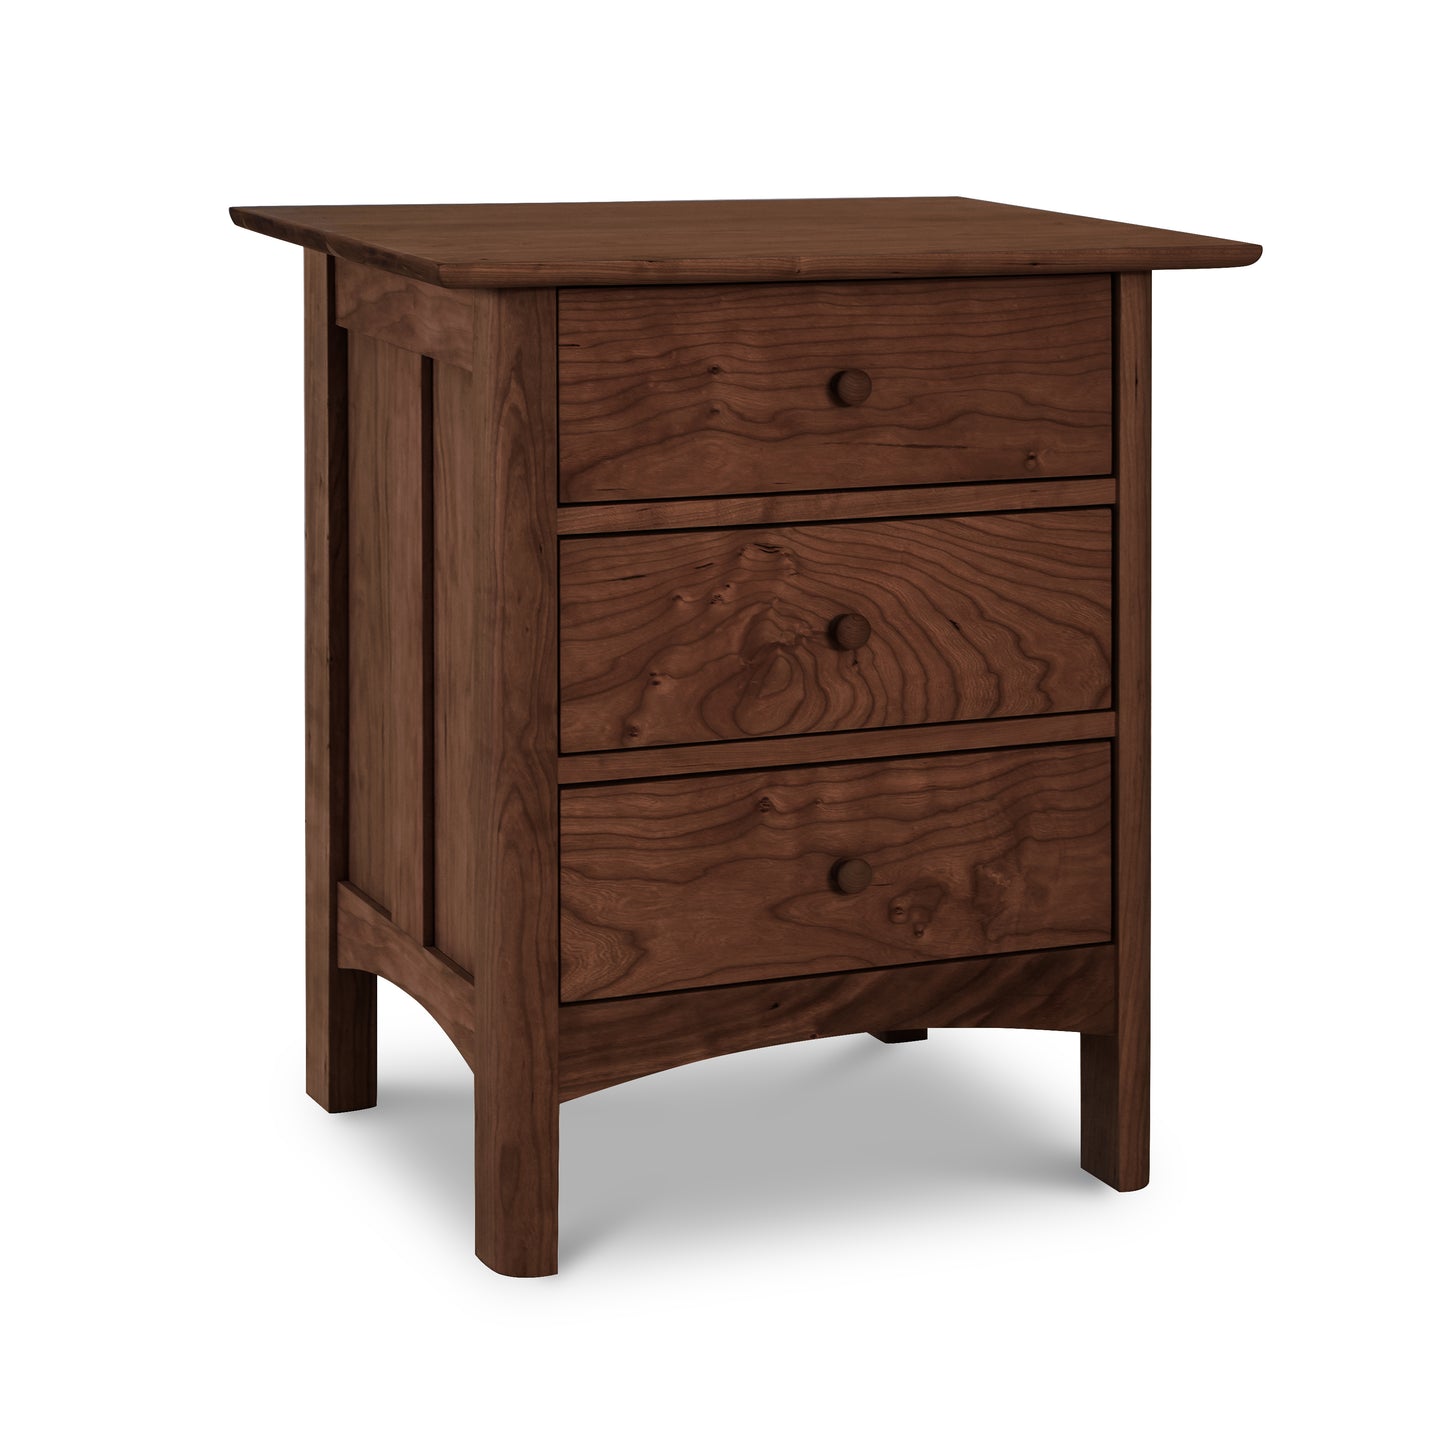 A Vermont Furniture Designs Heartwood Shaker 3-Drawer Nightstand with three drawers on a white background.